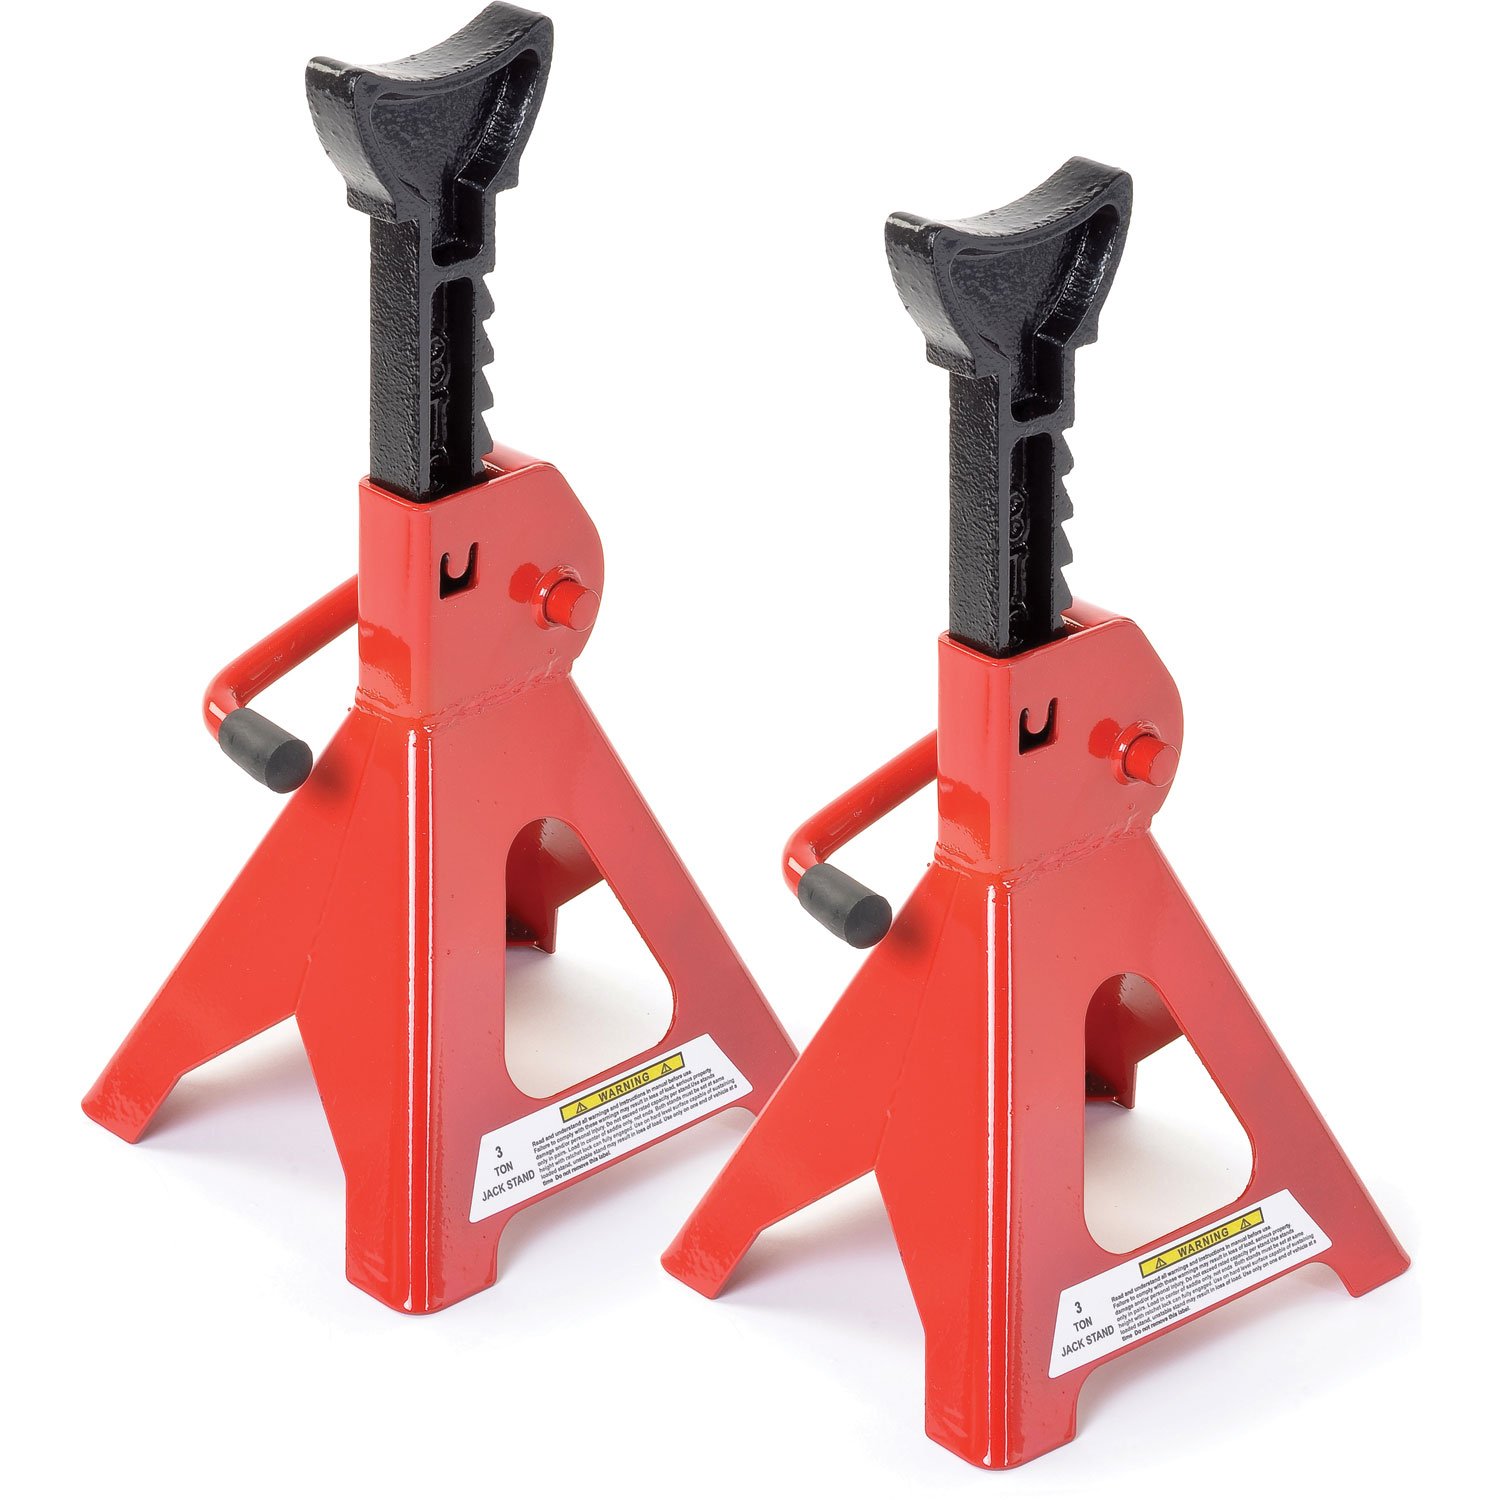 Car Jack Stand Durable 3 Ton Axle Stands Pair Ratchet Adjustable Lift Racks Truck Support Frame Vehicle Repair Tools 